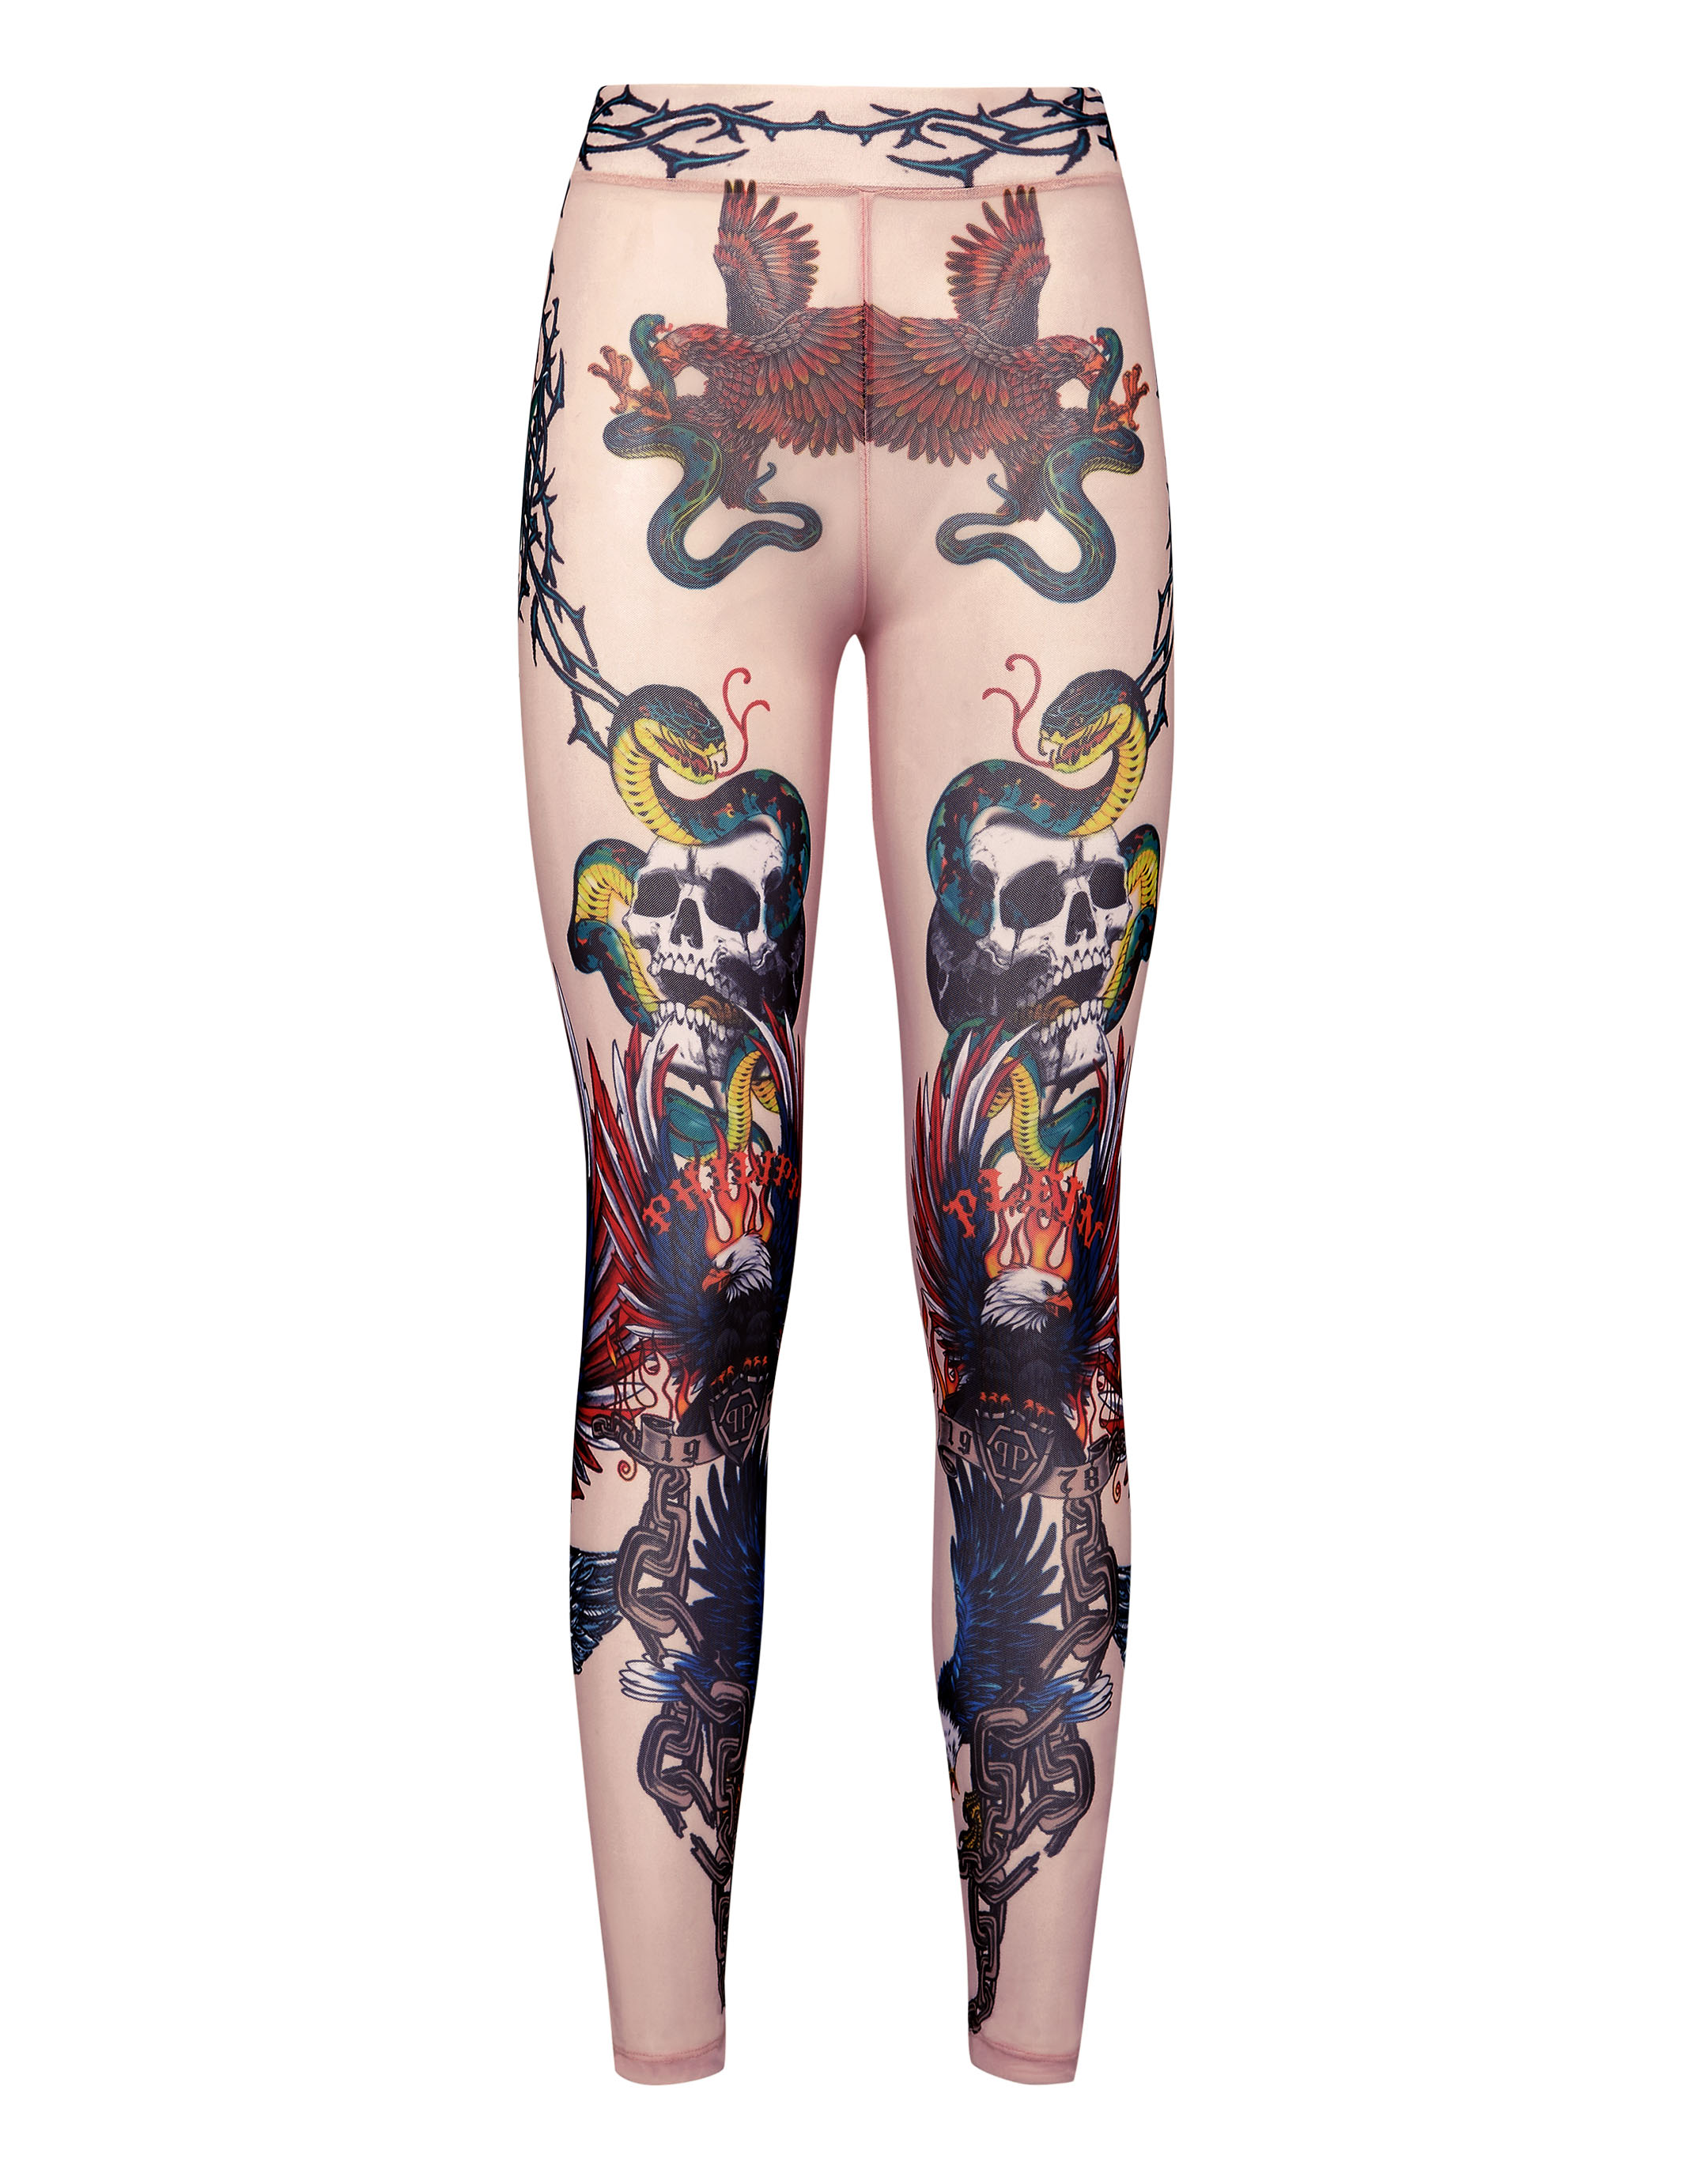 Discover more than 178 tattoo tights latest